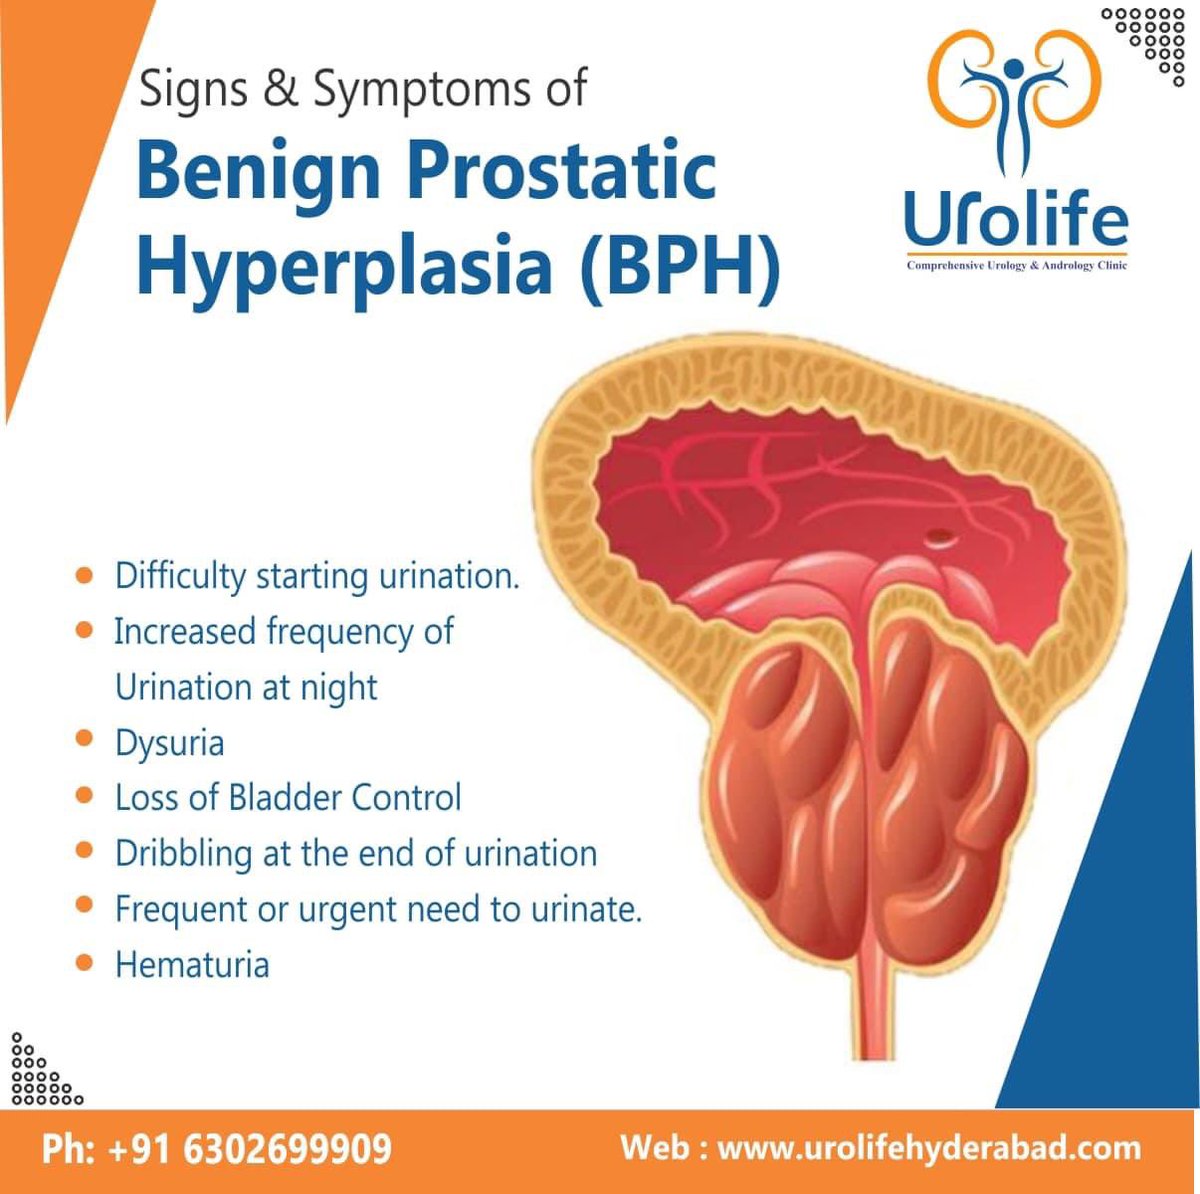 Signs and symptoms of benign prostatic hyperplasia (BPH)

Don’t suffer in Silence Call us to book an appointment now.

#Hyderabad #BPHcauses #BPH #benignprostatichyperplasia #urology #PROSTATE #BPHTreatment #urinaryhealth #urinarytrackhealth #kidneyproblems #Telangana